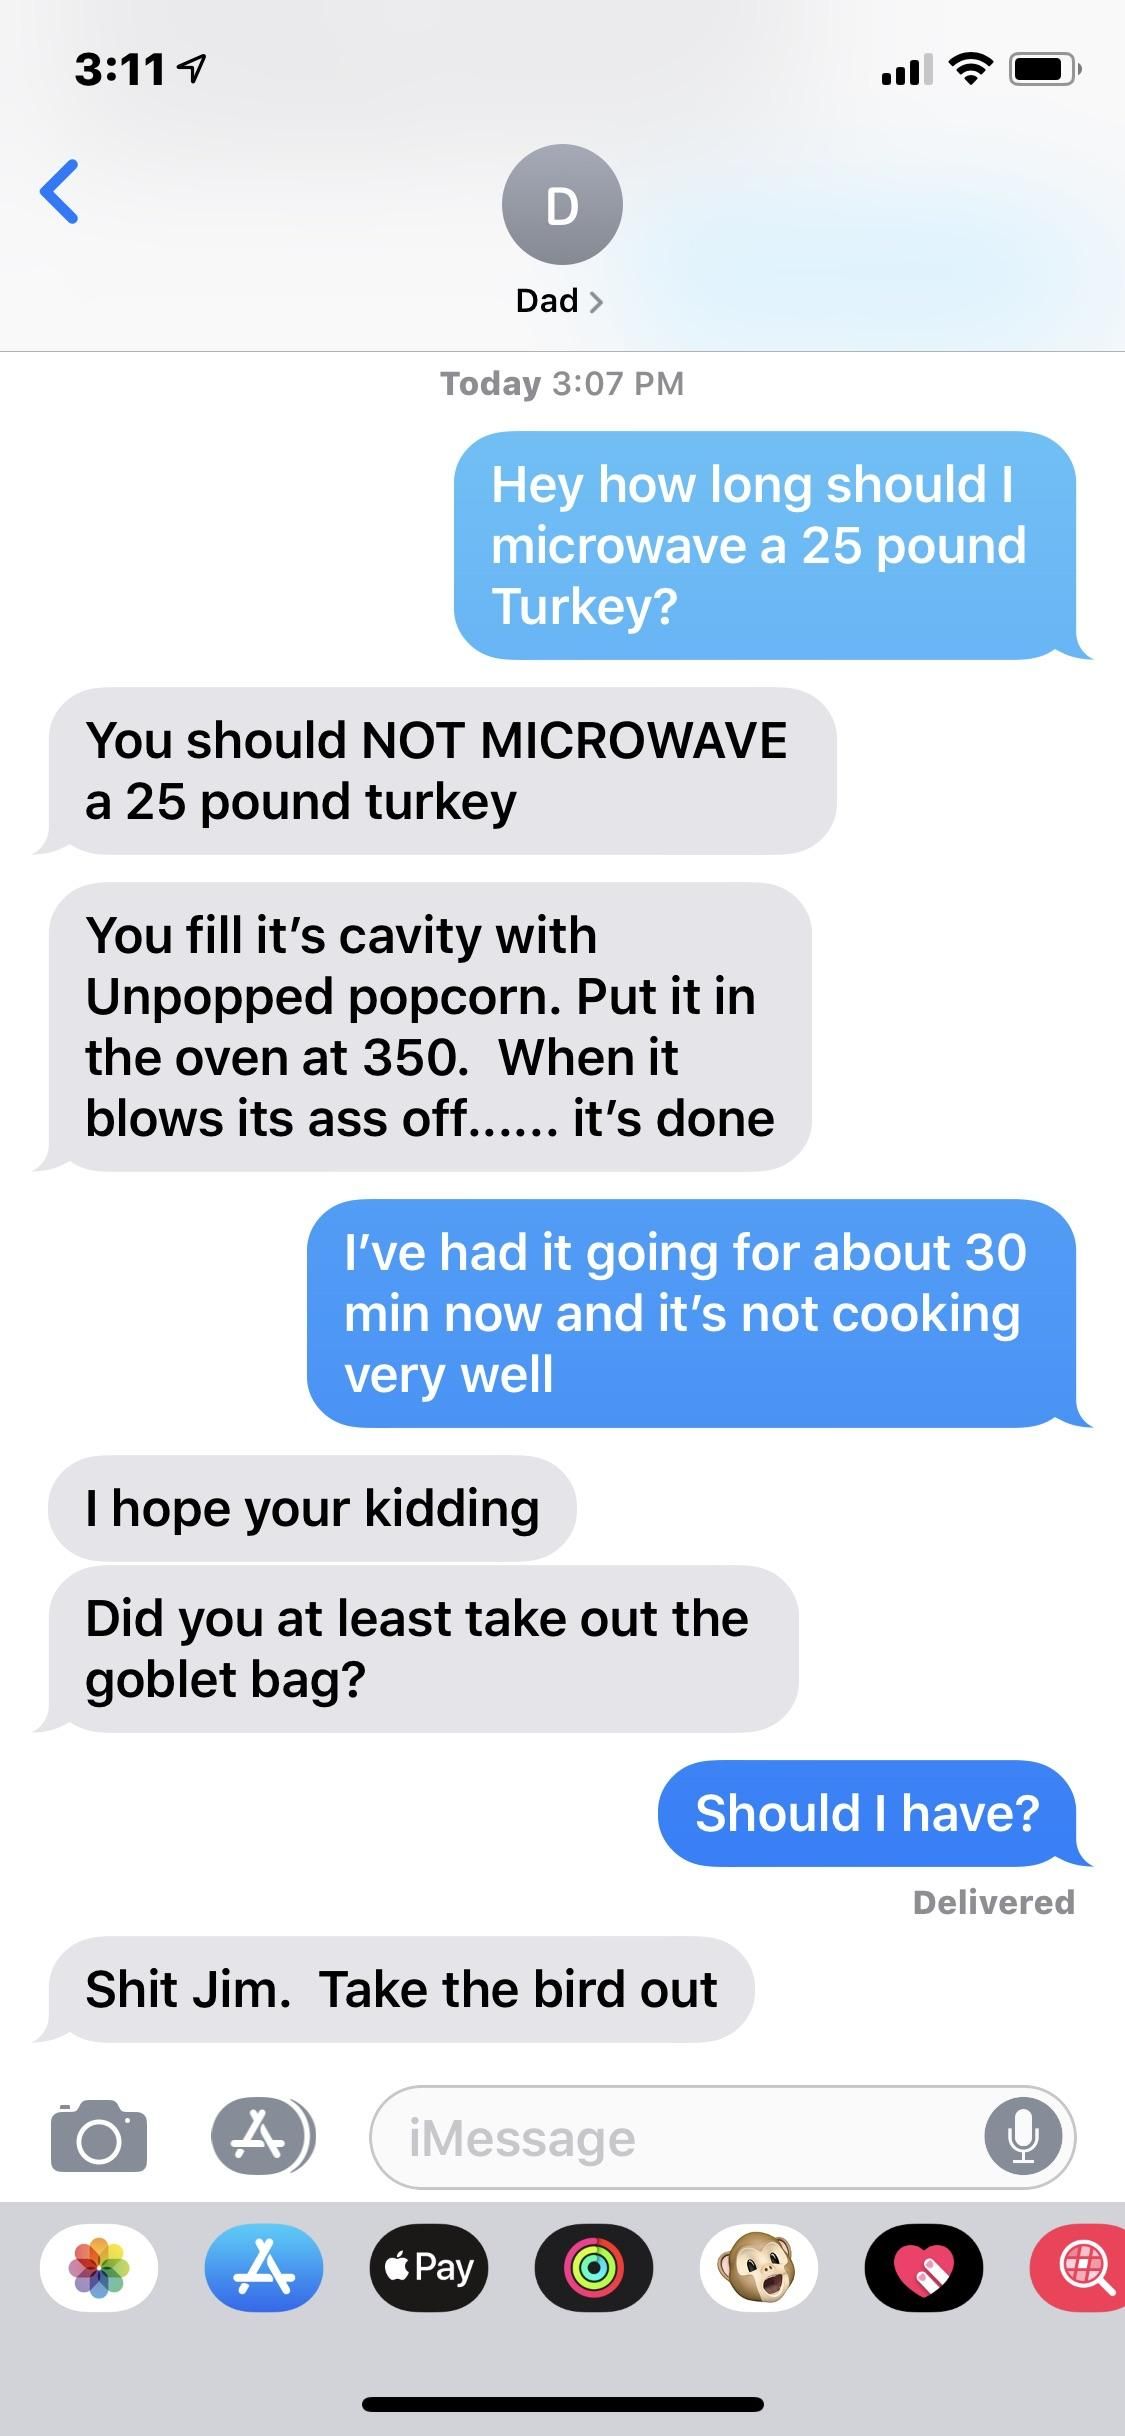 Asking my dad, who is a chef, how long to microwave a 25 pound turkey...